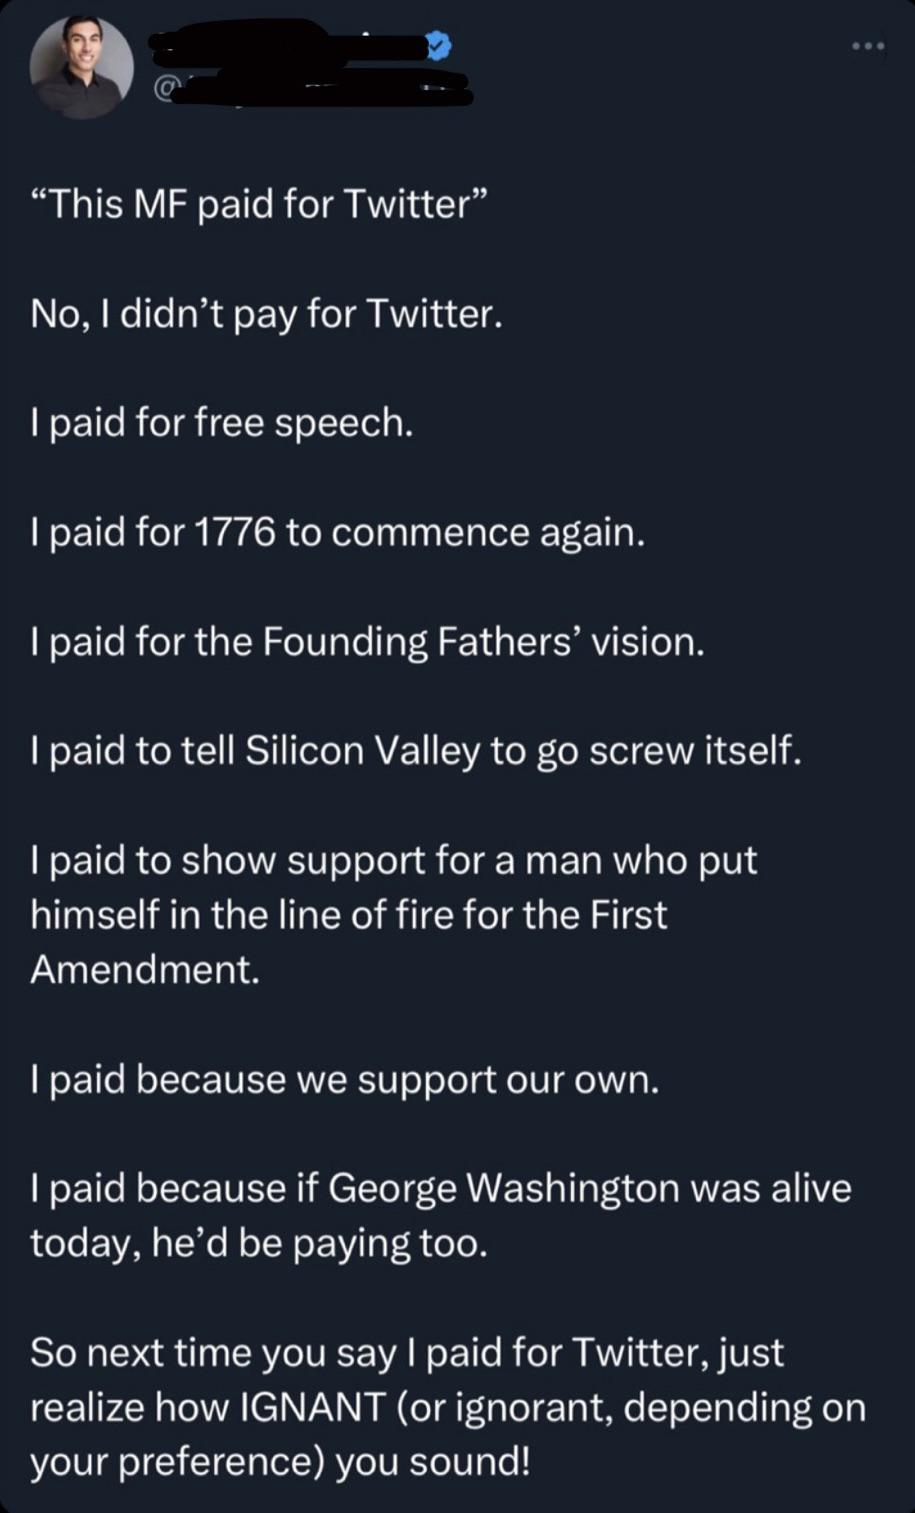 cringe pics - paid for free speech tweet - "This Mf paid for Twitter" No, I didn't pay for Twitter. I paid for free speech. I paid for 1776 to commence again. I paid for the Founding Fathers' vision. I paid to tell Silicon Valley to go screw itself. I pai